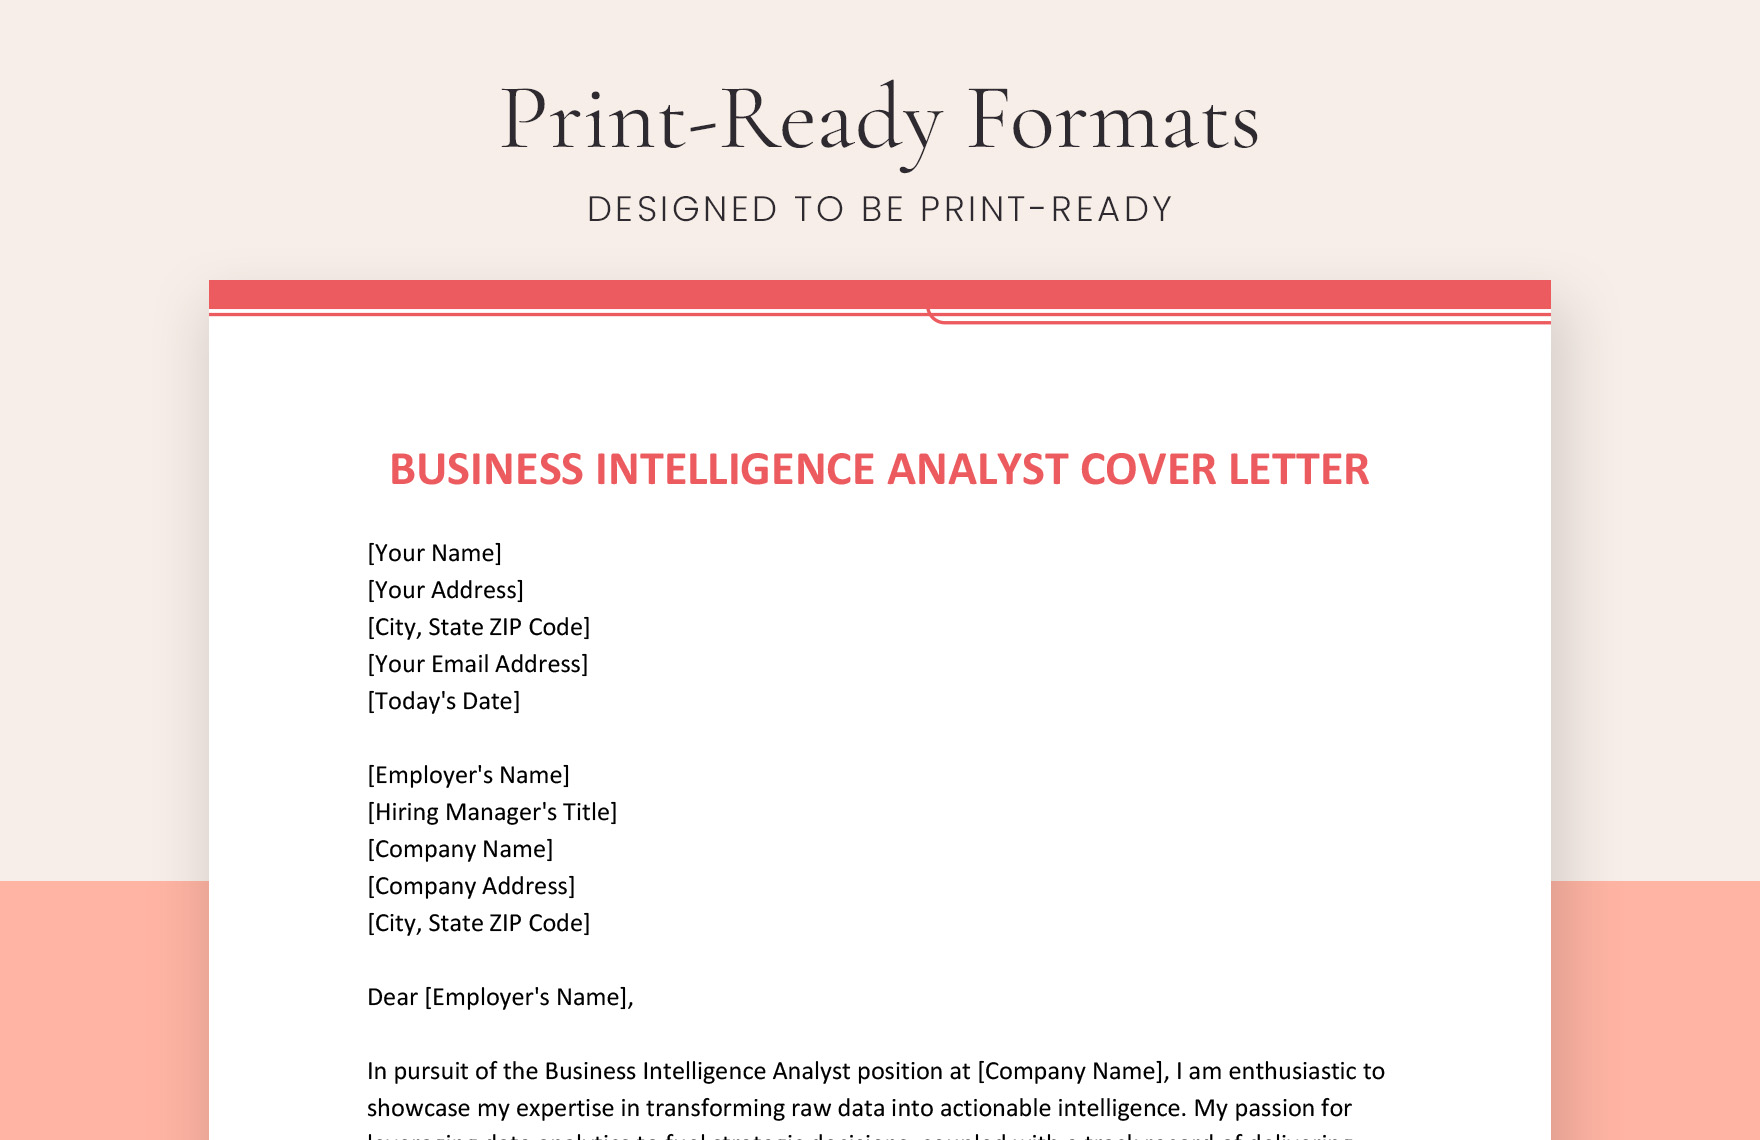 Business Intelligence Analyst Cover Letter